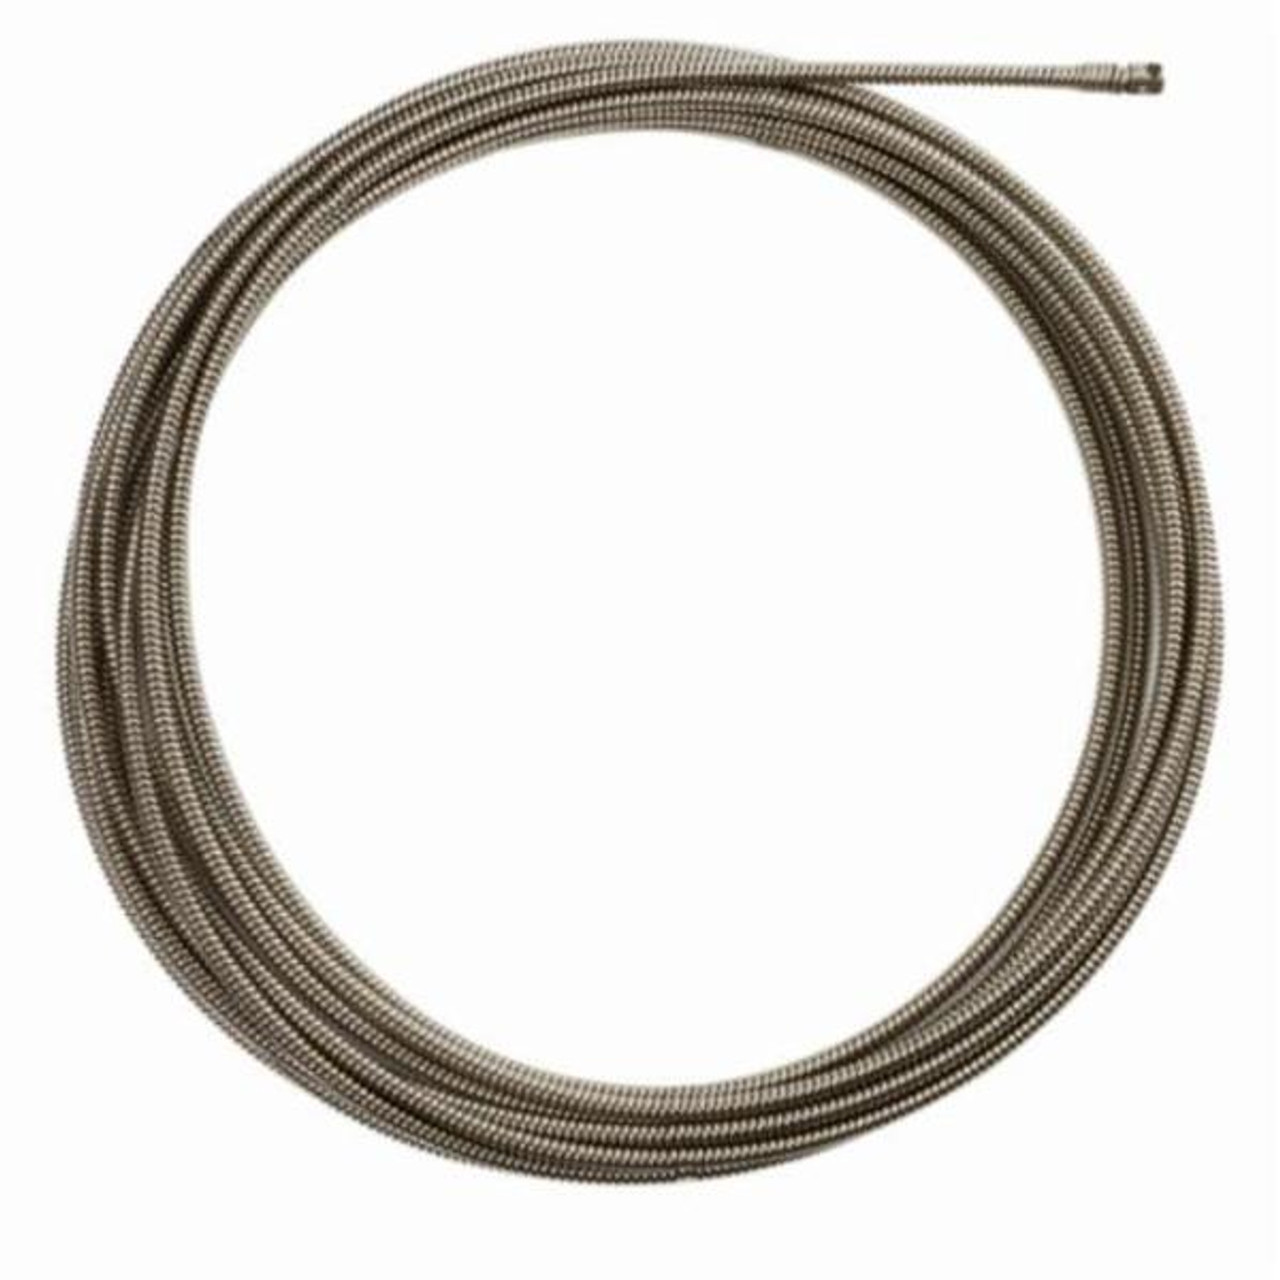 INNER CORE COUPLING CABLE W/ RUSTGUARD 3/8